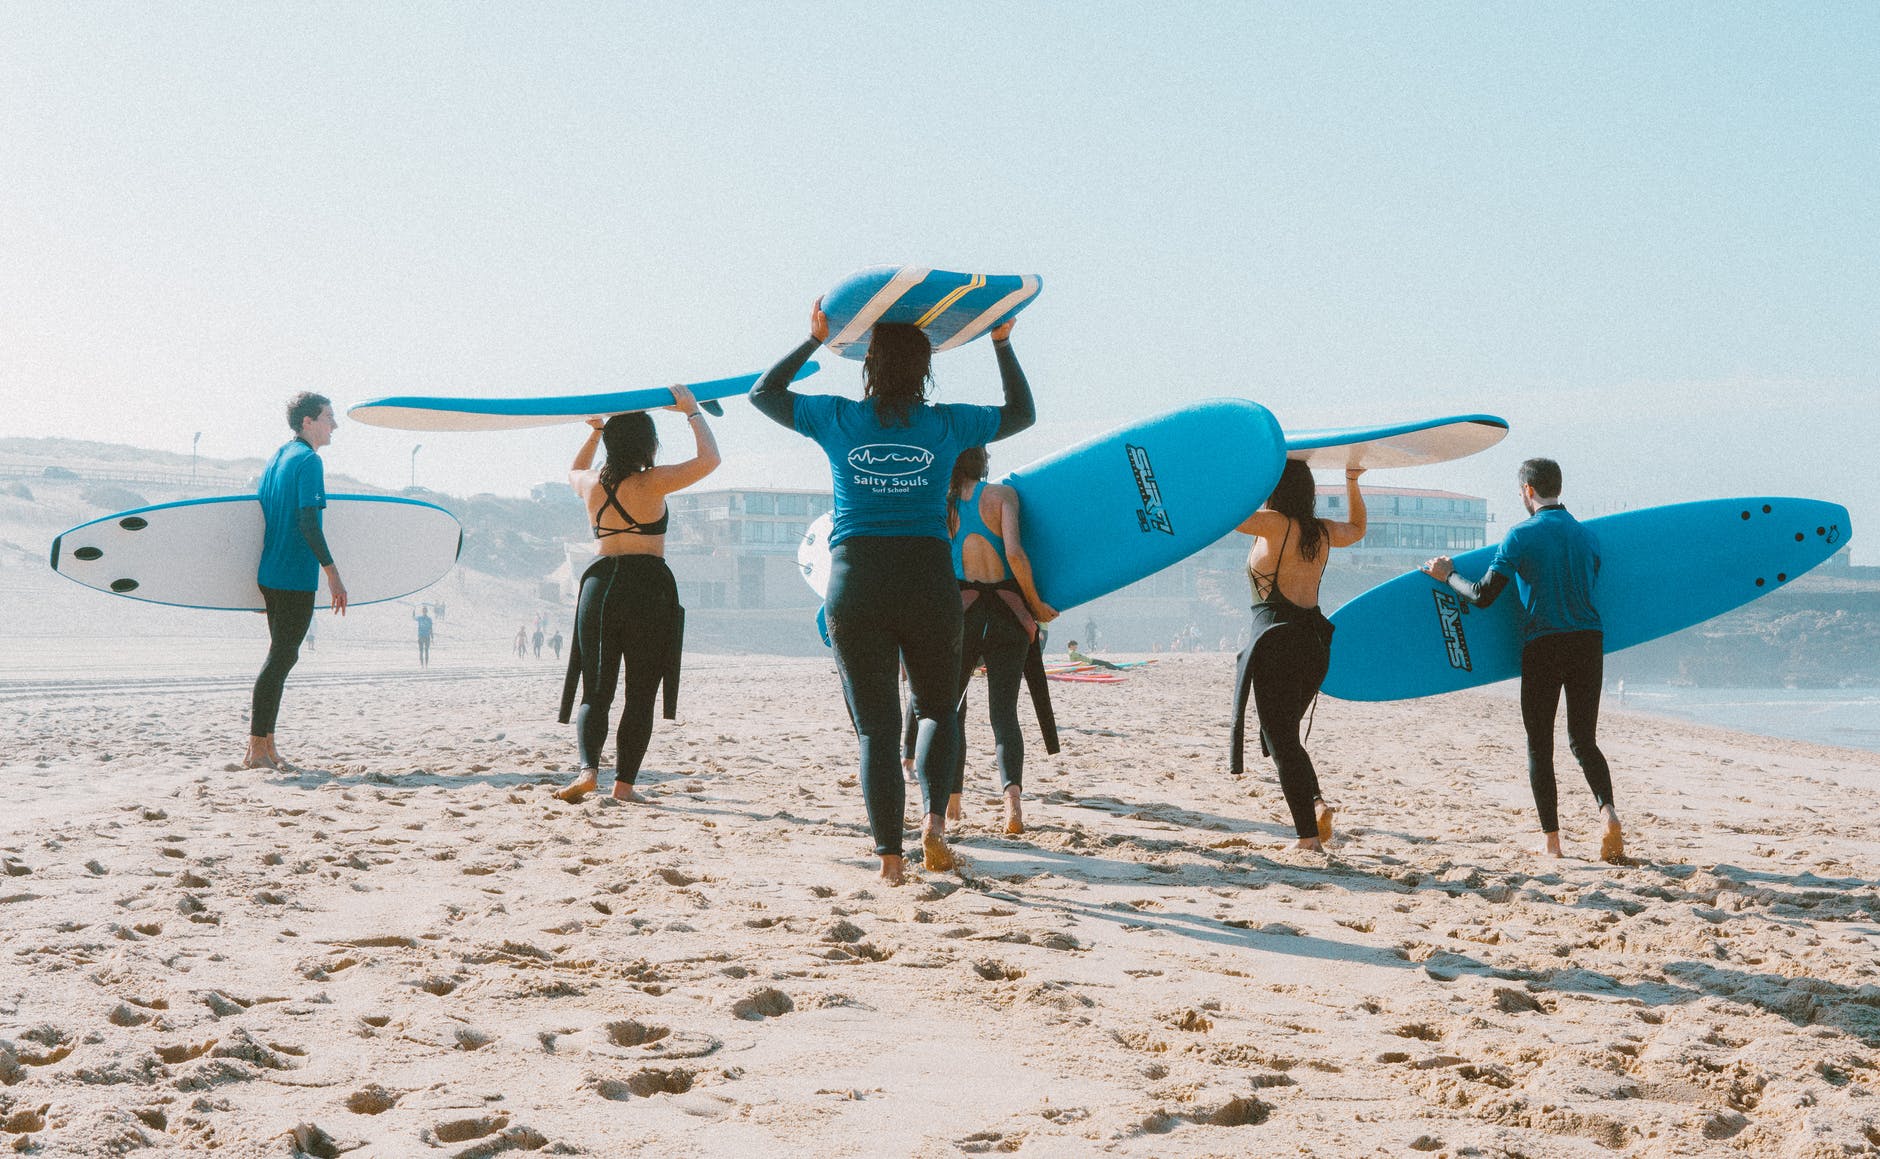 Group of people with surfboards